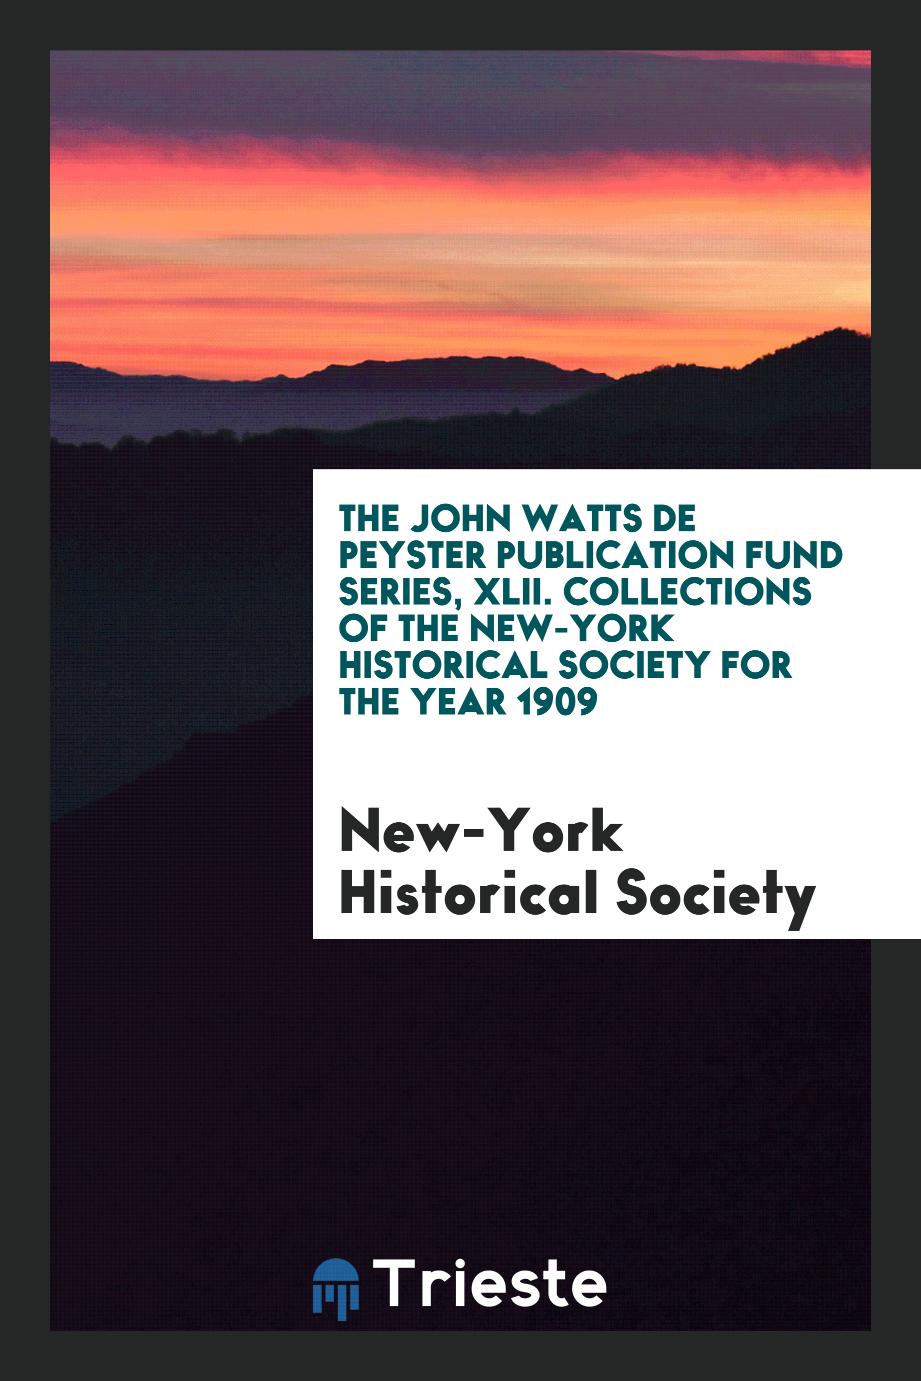 The John Watts de Peyster Publication Fund Series, XLII. Collections of the New-York Historical Society for the Year 1909